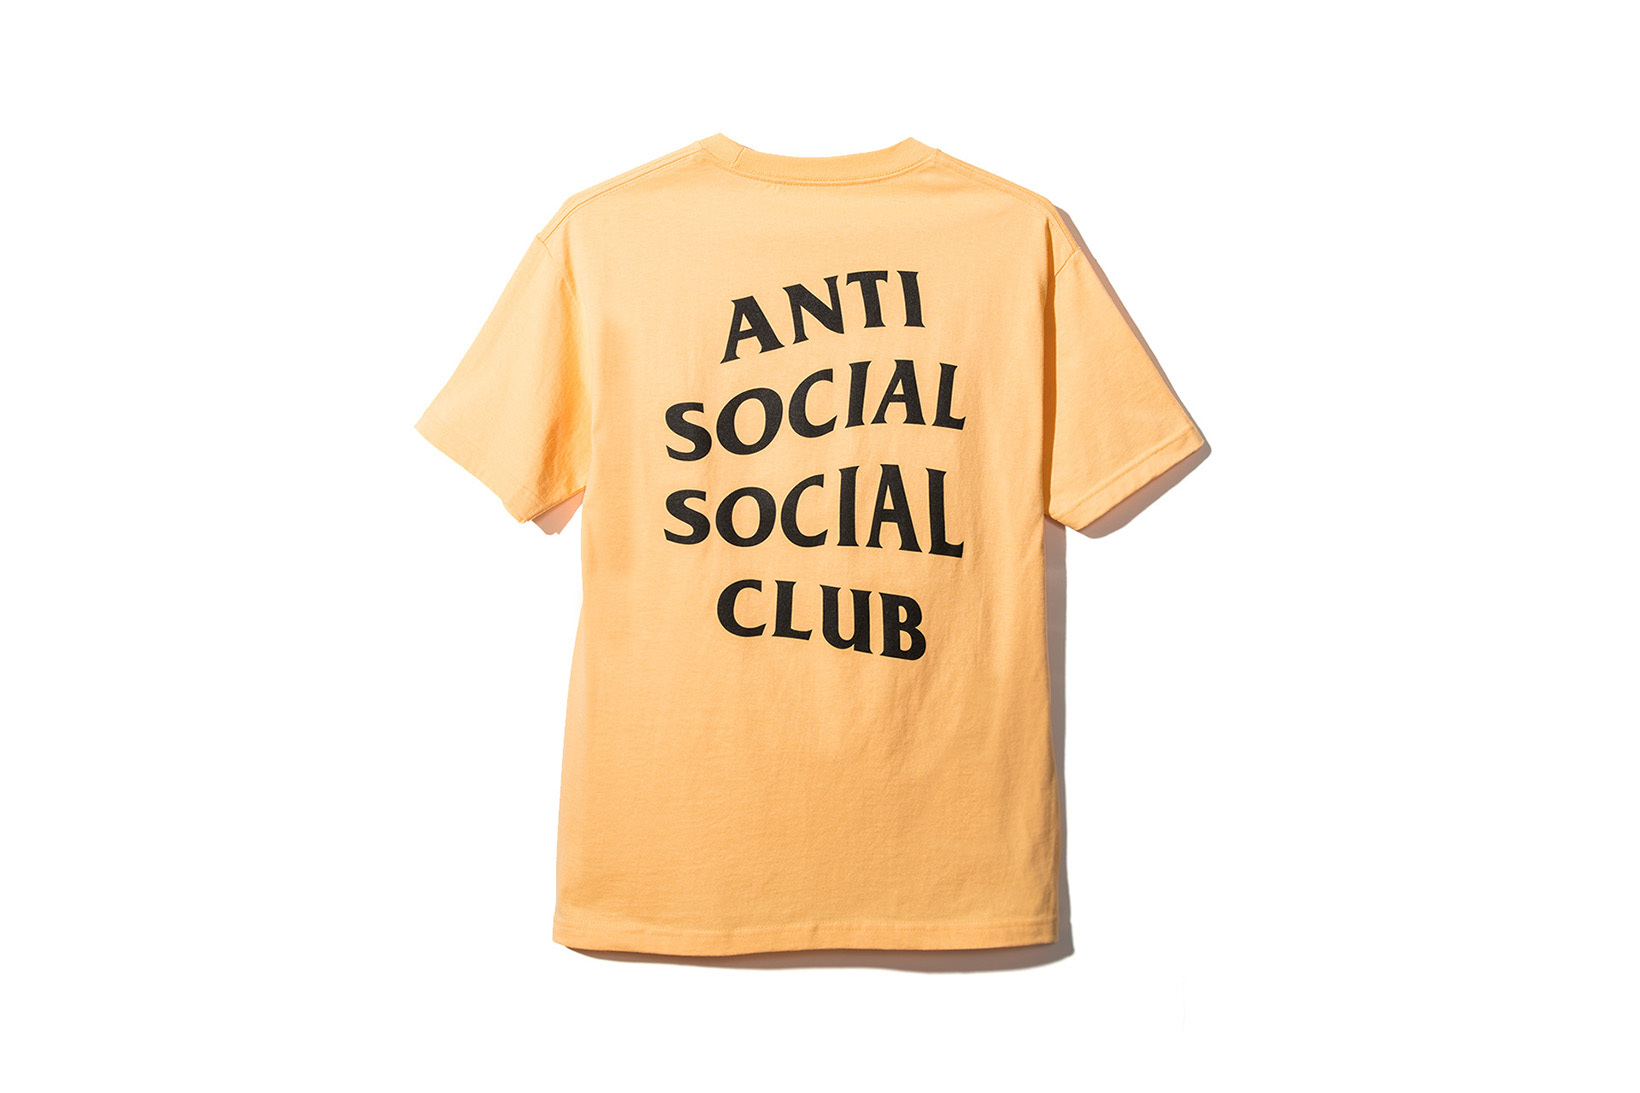 Anti Social Social Club SS17 Collection - Trapped Magazine1640 x 1093